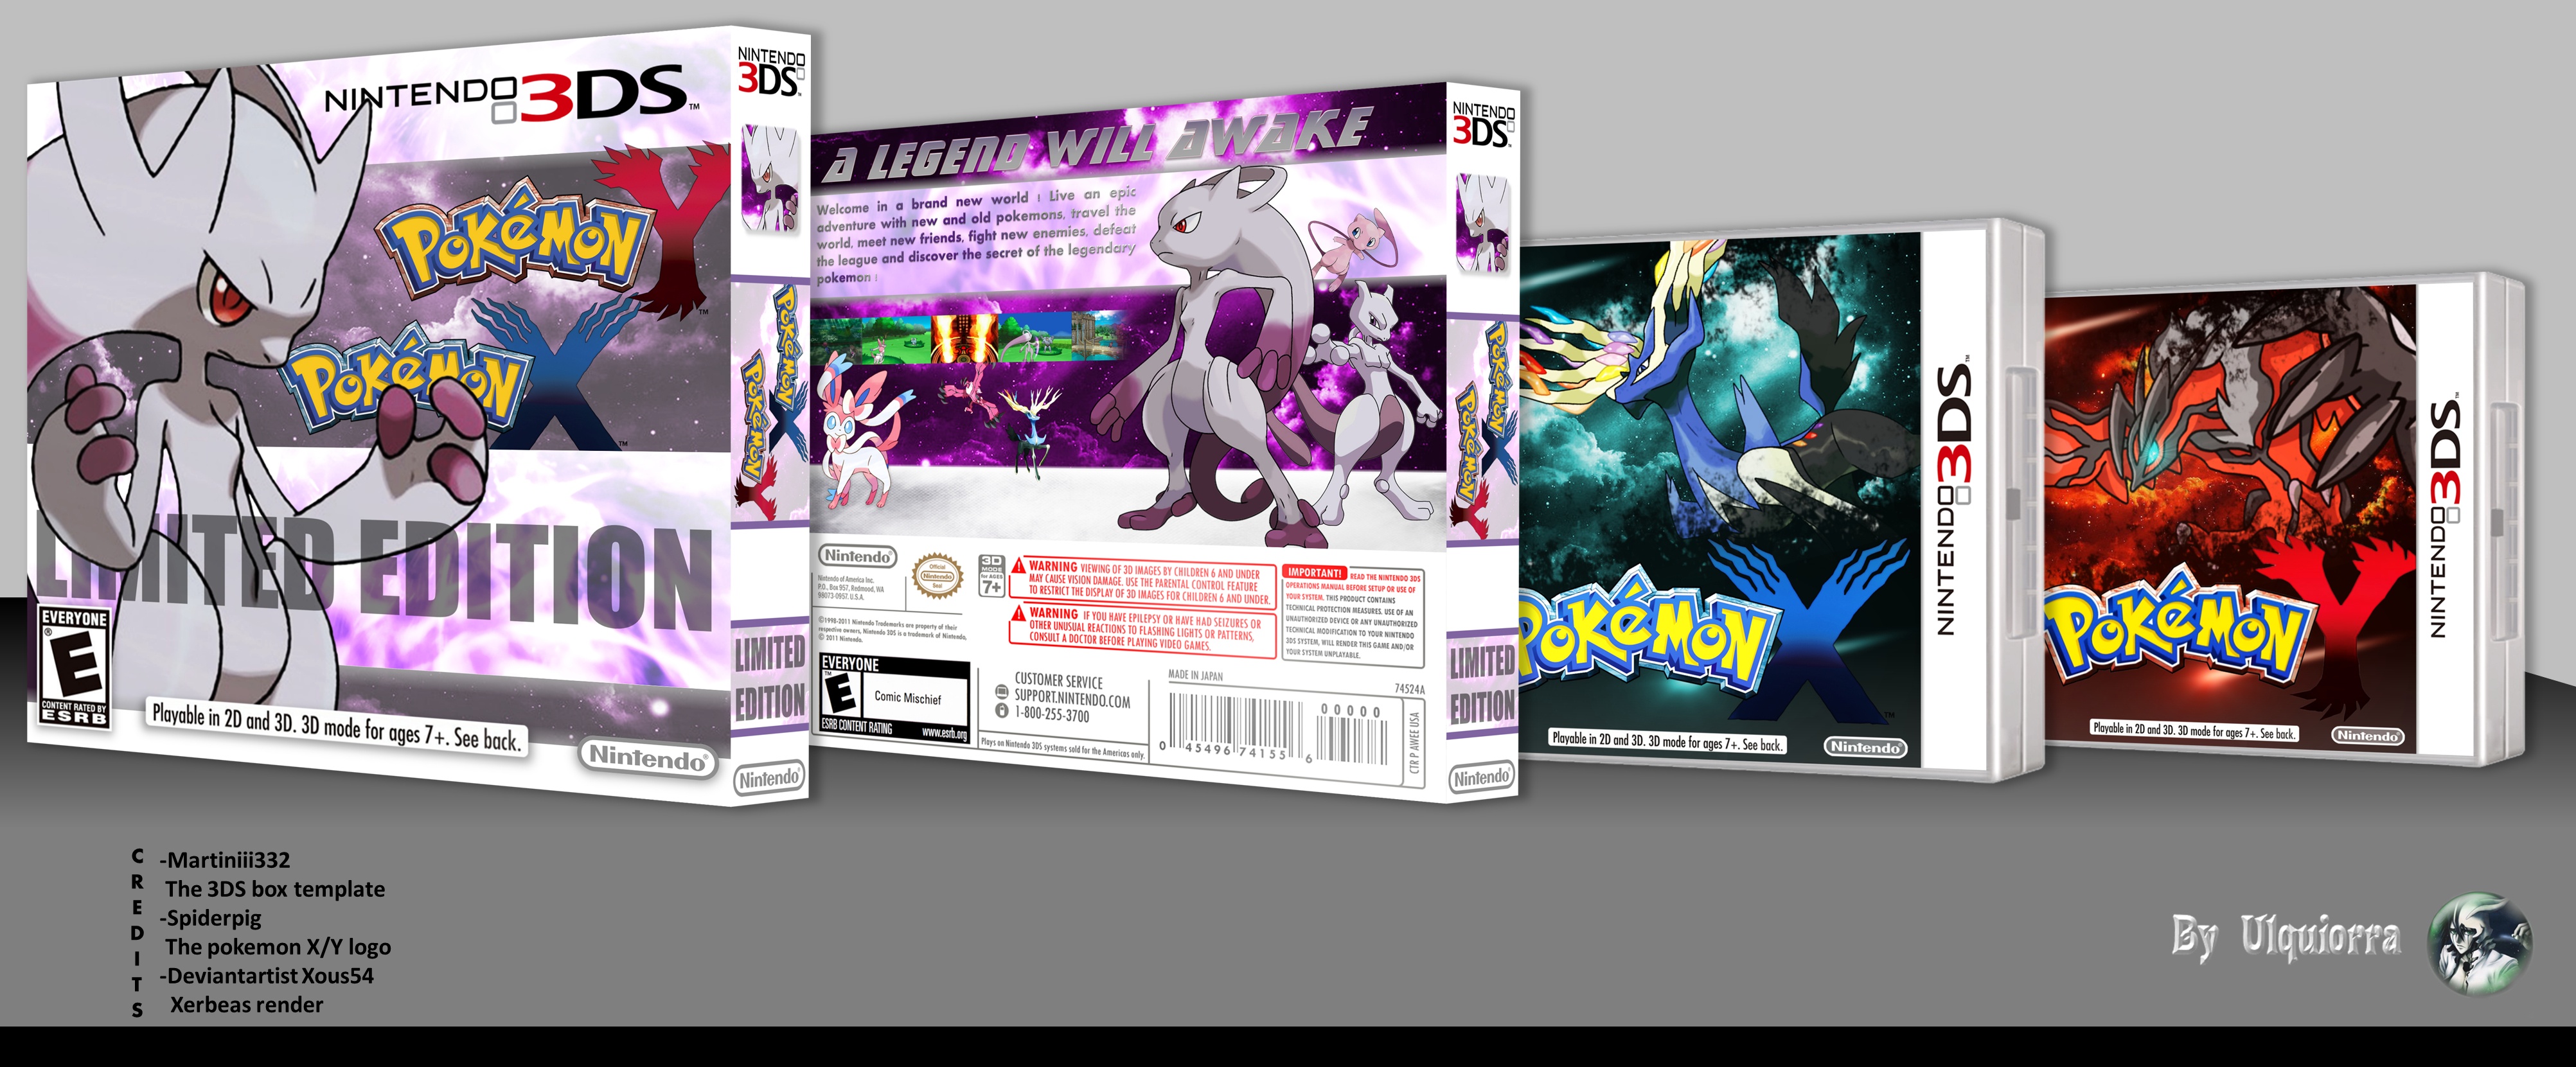 Pokemon X and Y limited edition box cover